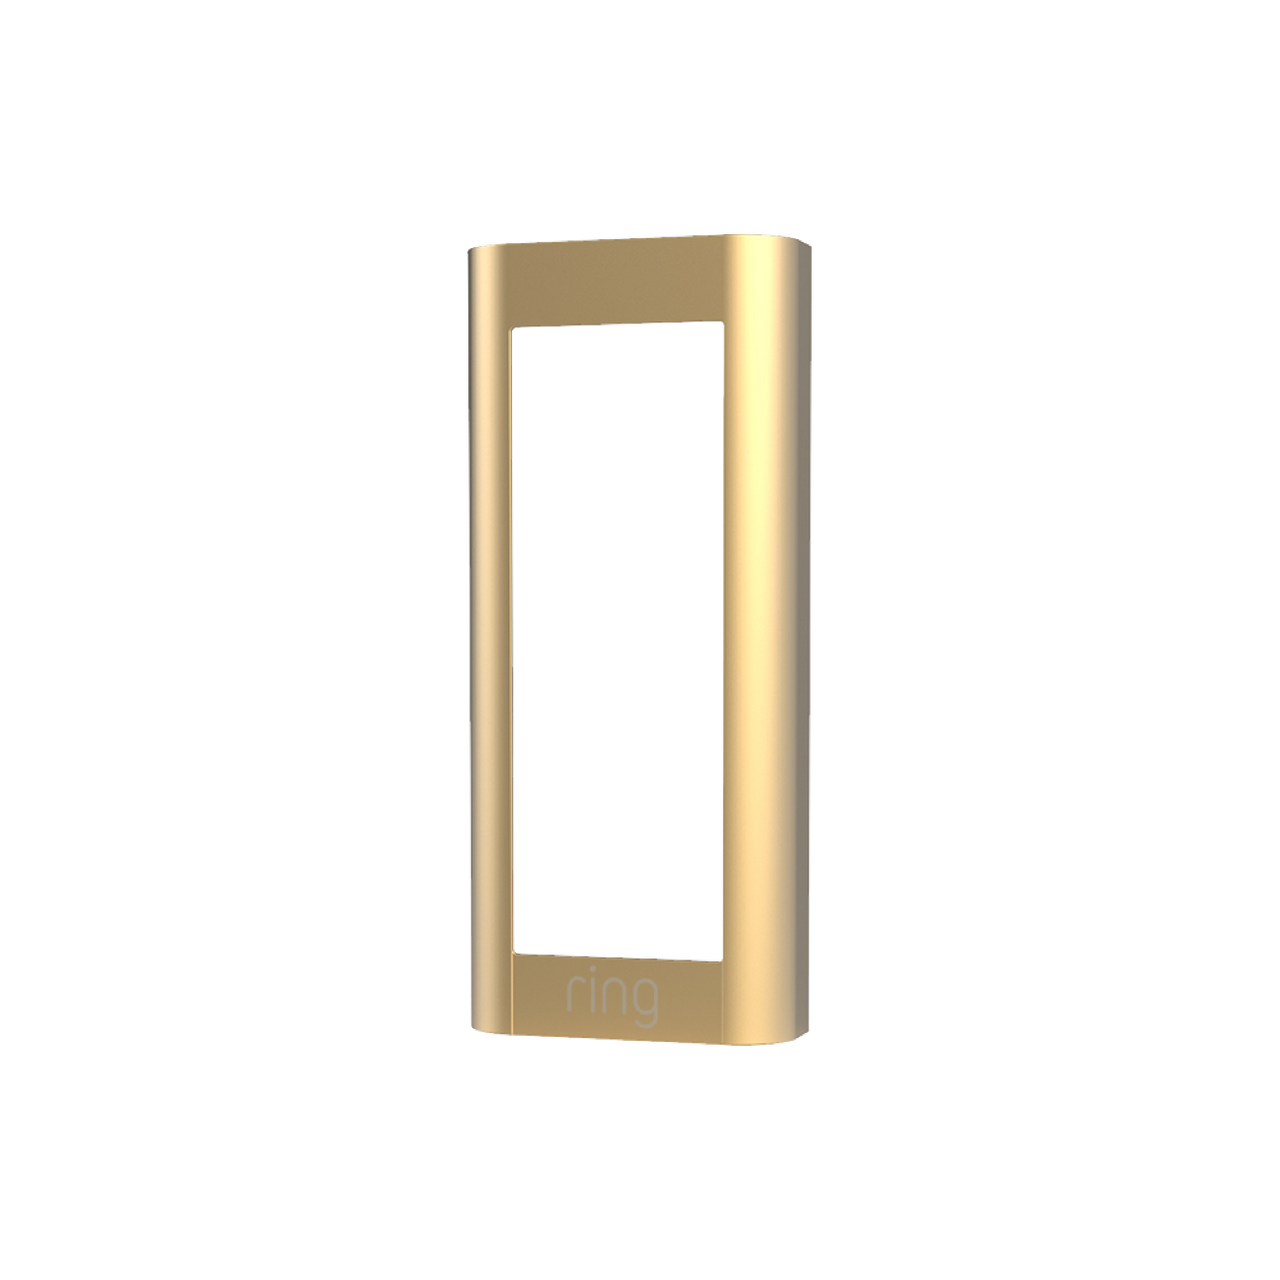 products/JF_interchangeableFaceplate_goldmetal_1029x1029_4aa0ae85-38d9-45c3-aca6-6701eb35b4c9.png